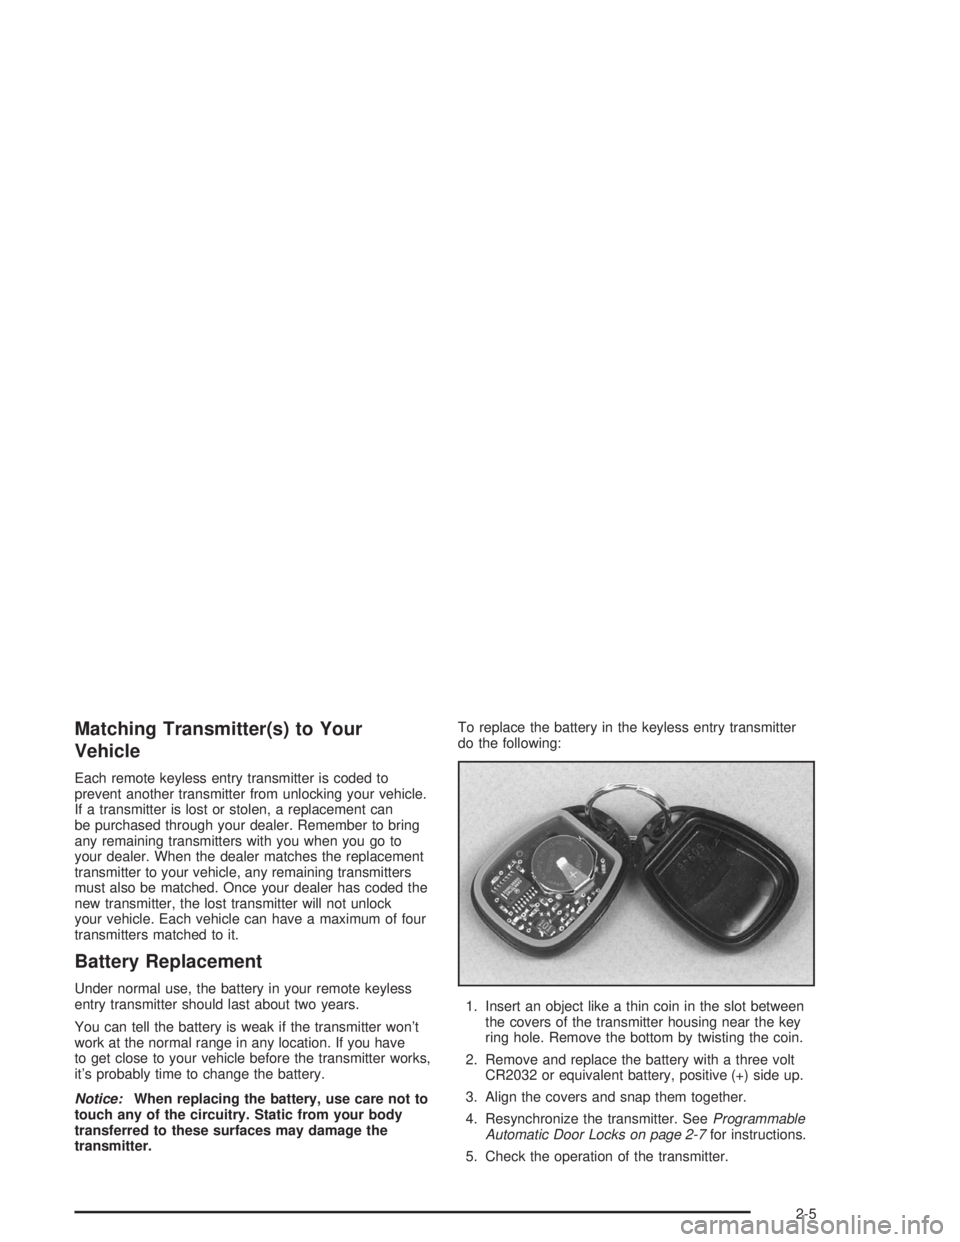 CHEVROLET S10 2004  Owners Manual Matching Transmitter(s) to Your
Vehicle
Each remote keyless entry transmitter is coded to
prevent another transmitter from unlocking your vehicle.
If a transmitter is lost or stolen, a replacement can